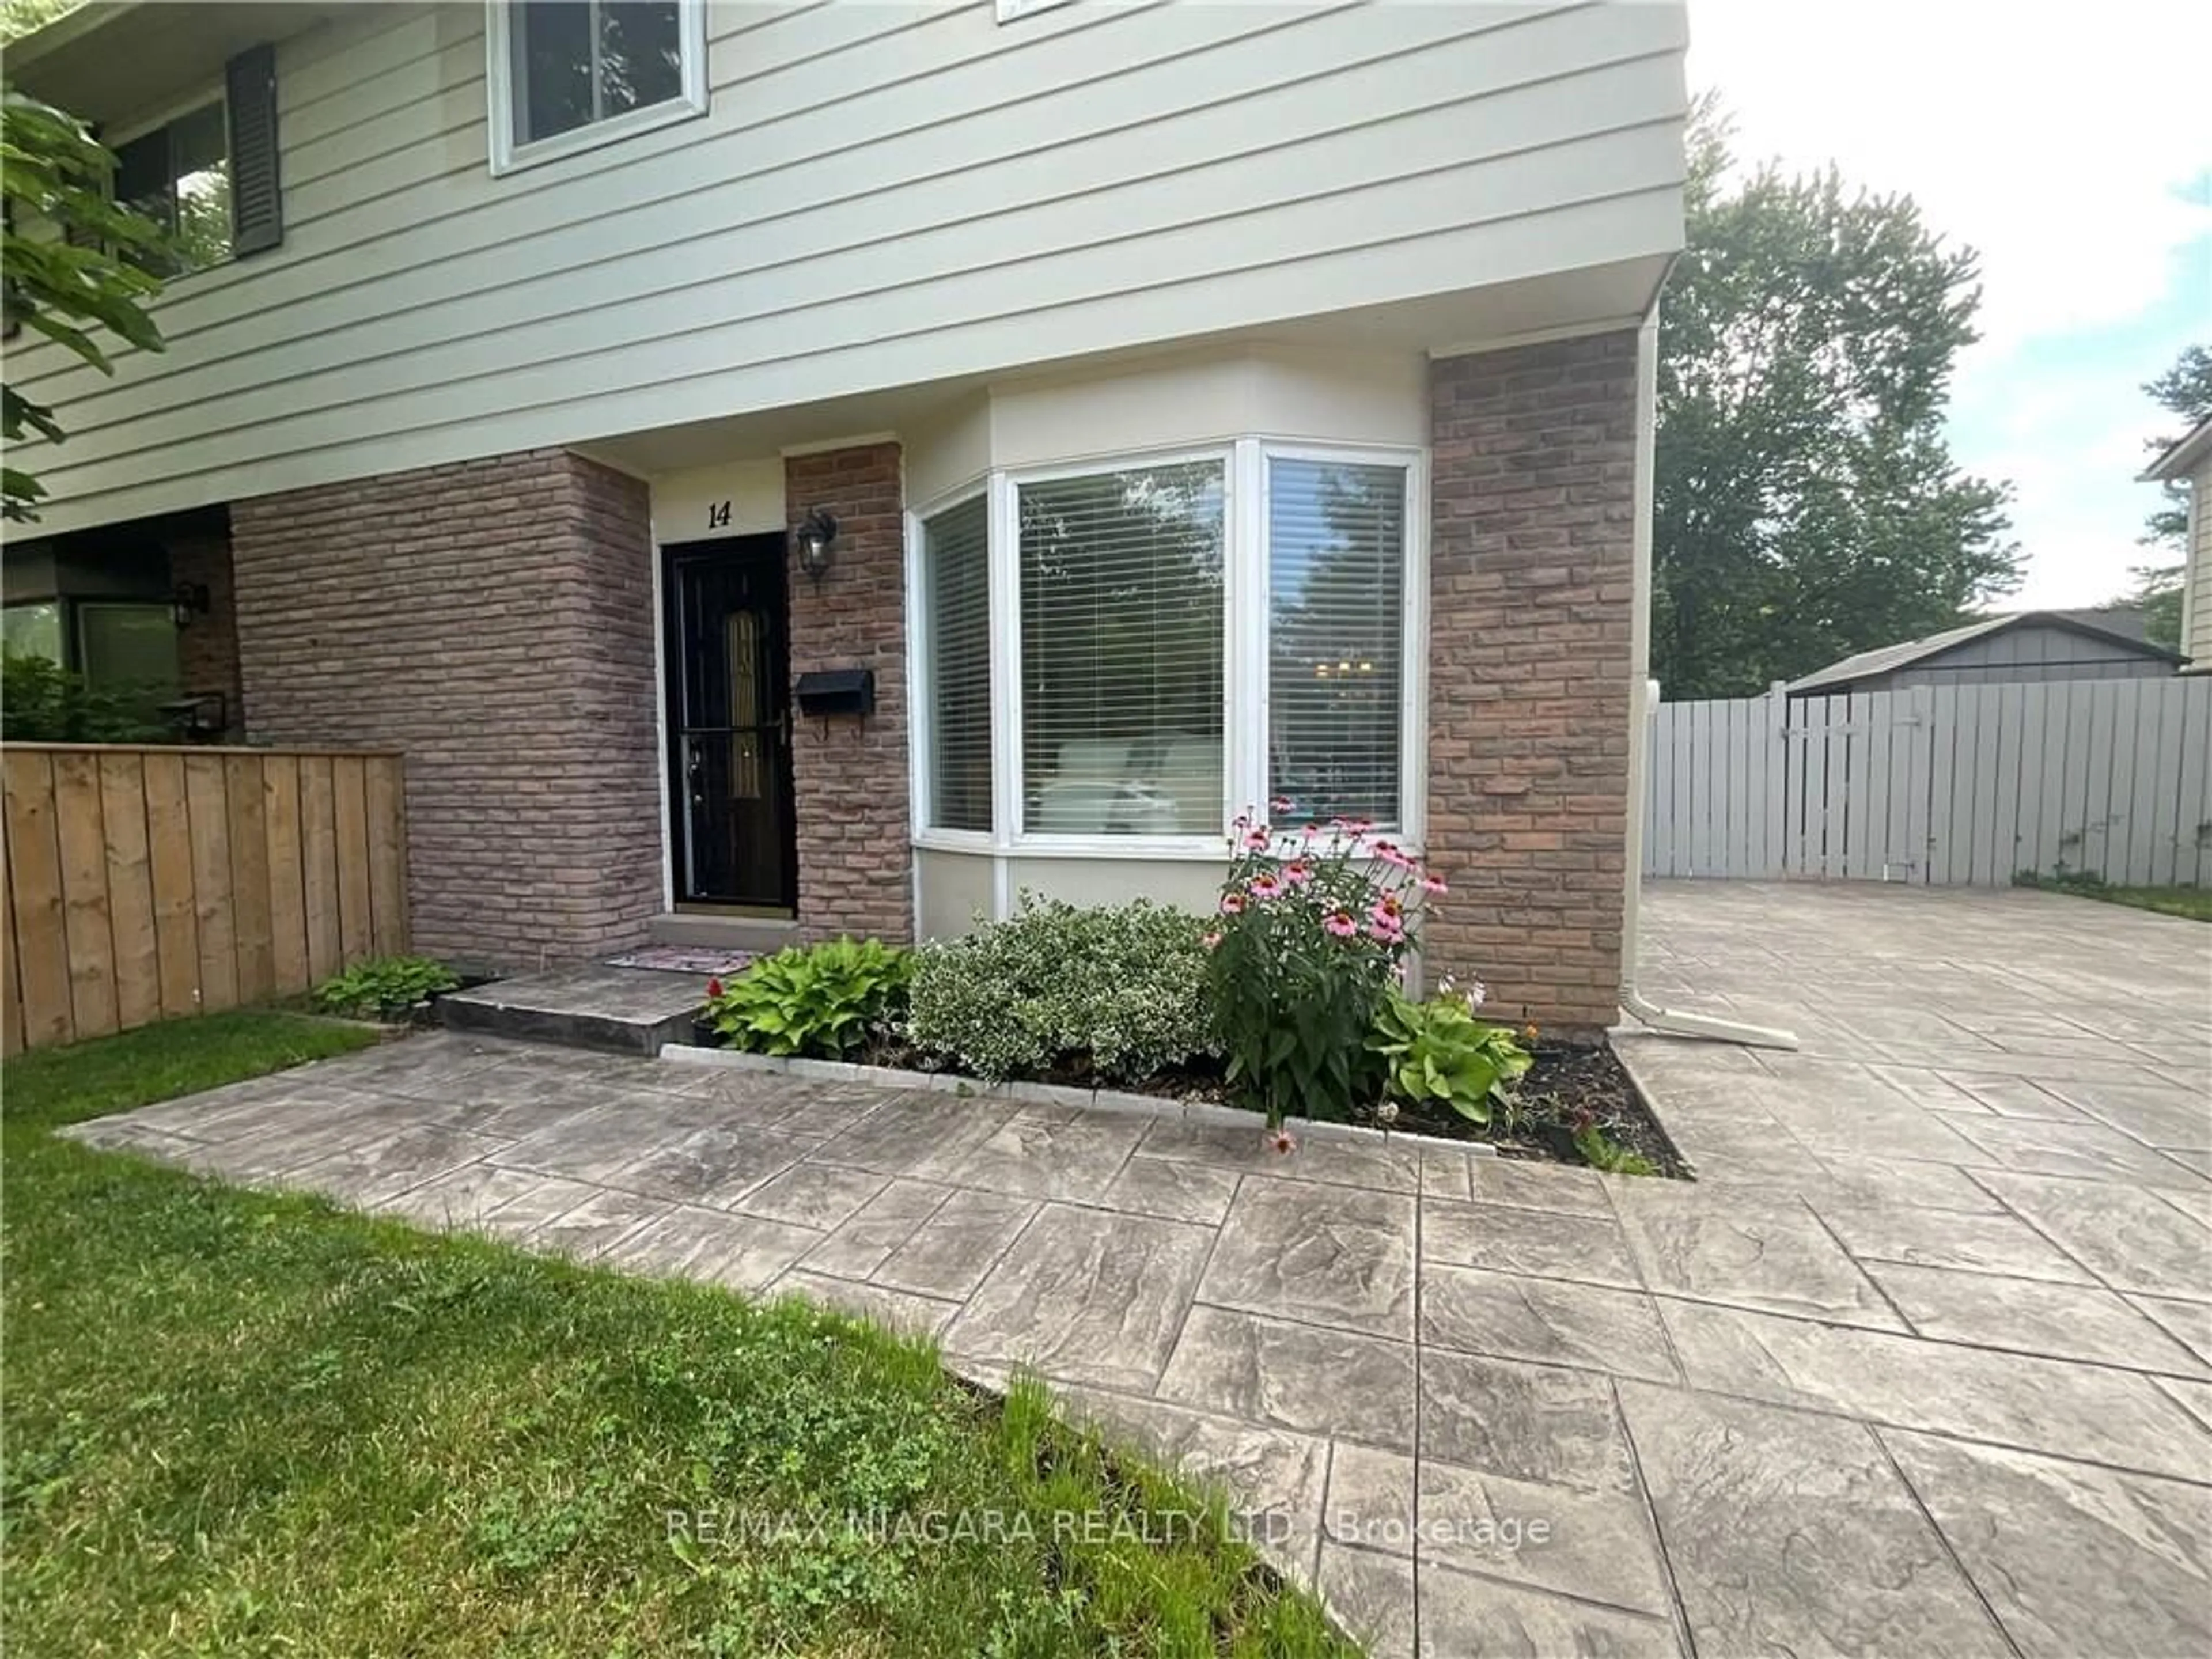 Home with brick exterior material for 14 Stockwell Rd, St. Catharines Ontario L2N 6P7